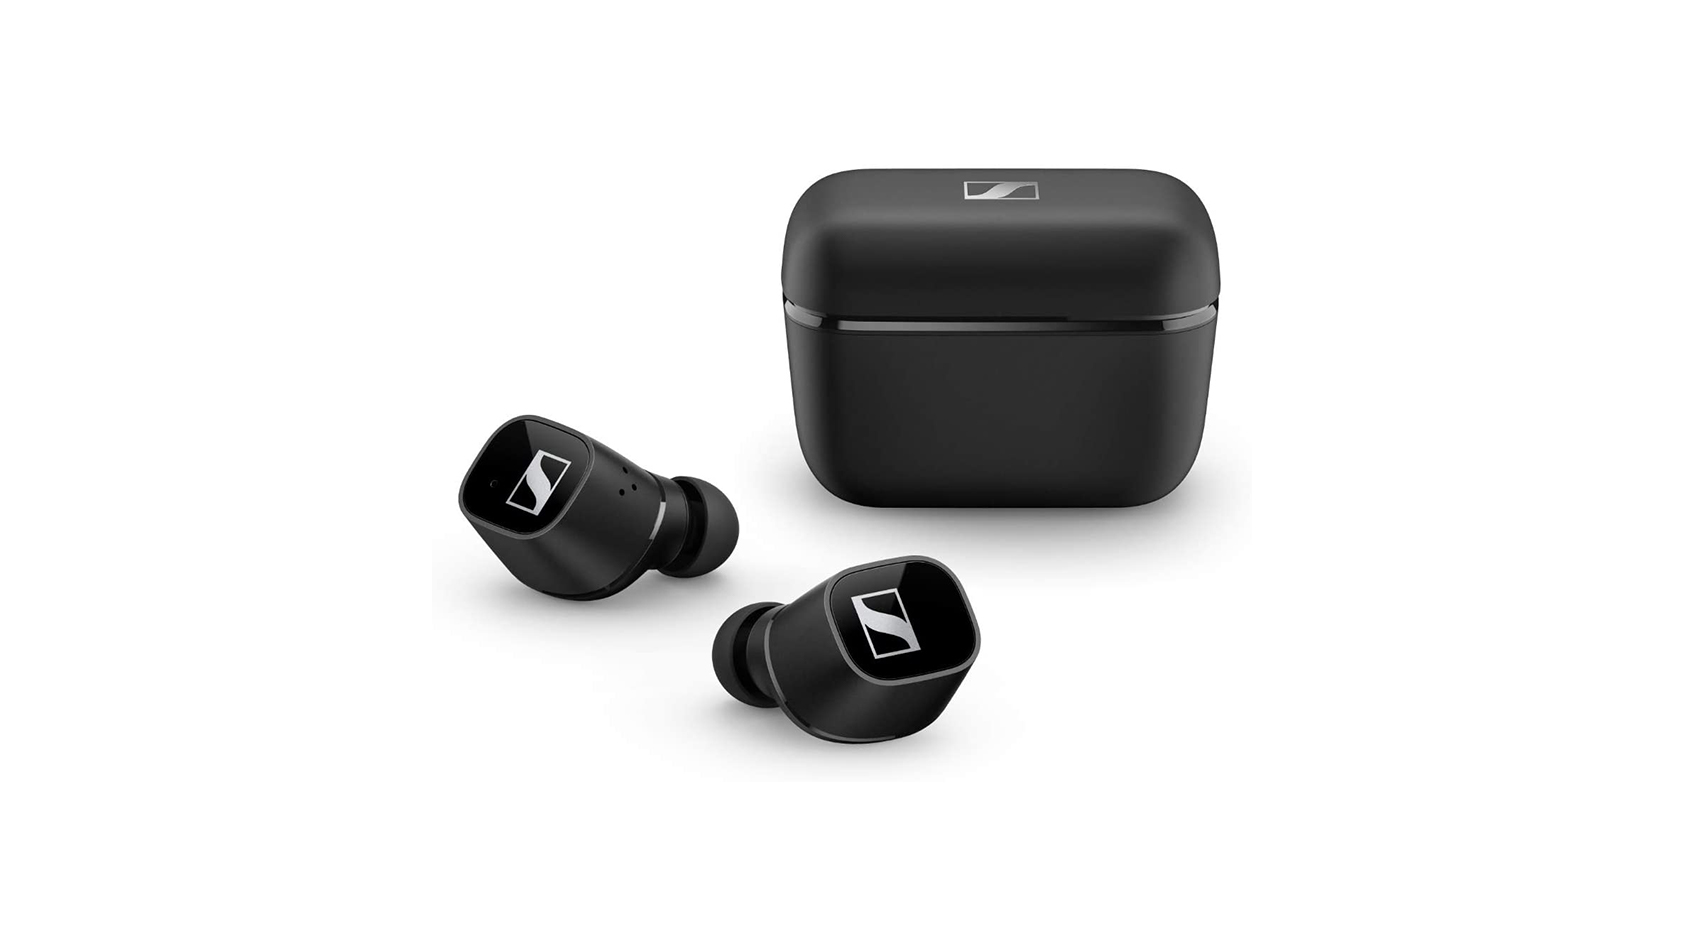 The Sennheiser CX 400BT True Wireless earbuds and charging case in black against a white background.